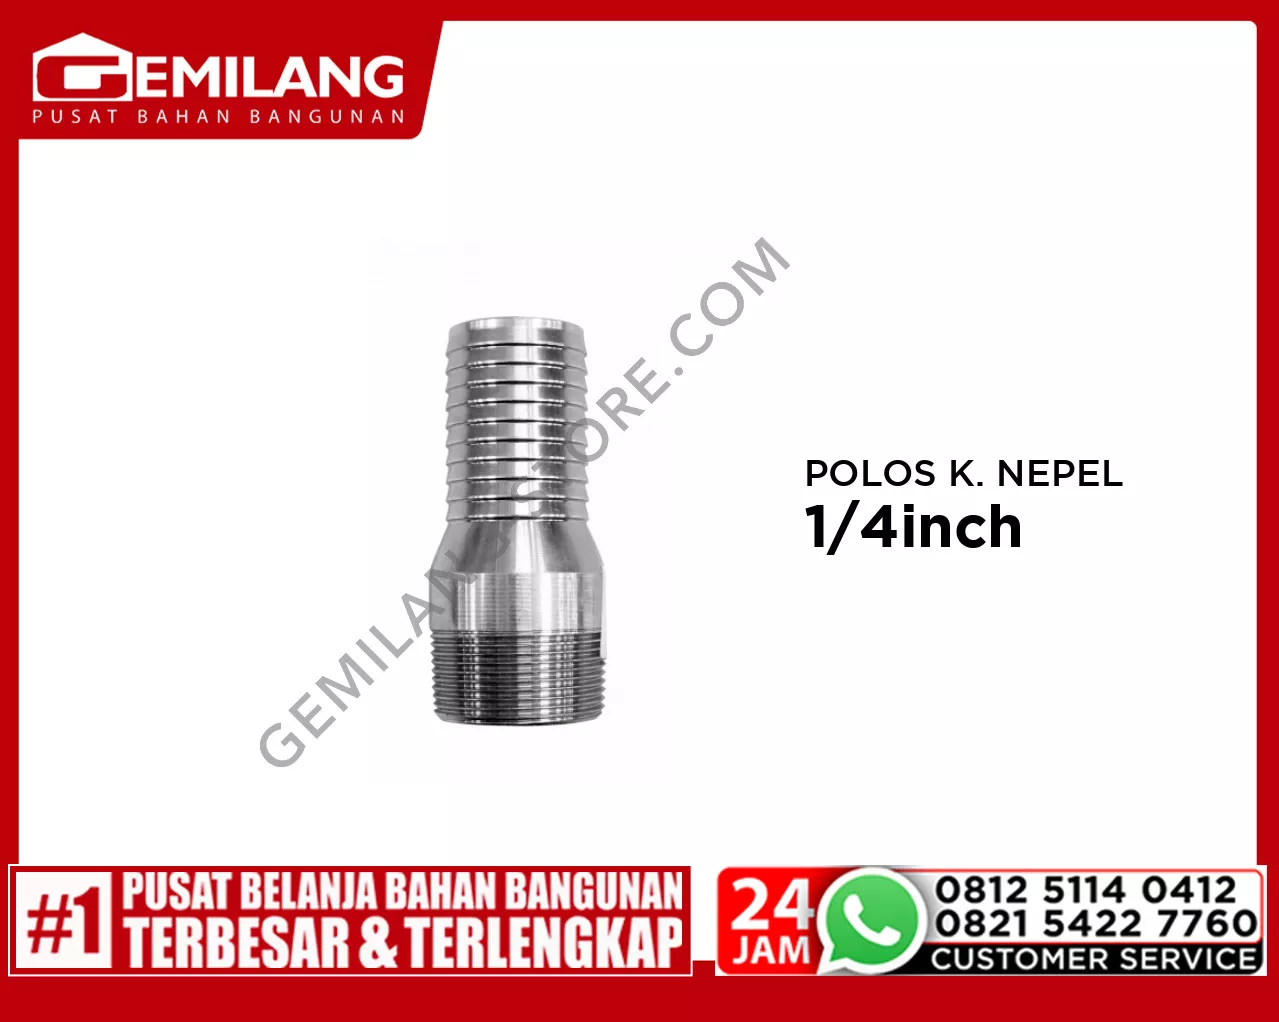 POLOS KING NEPEL 1 1 1/4inch (2154-013)